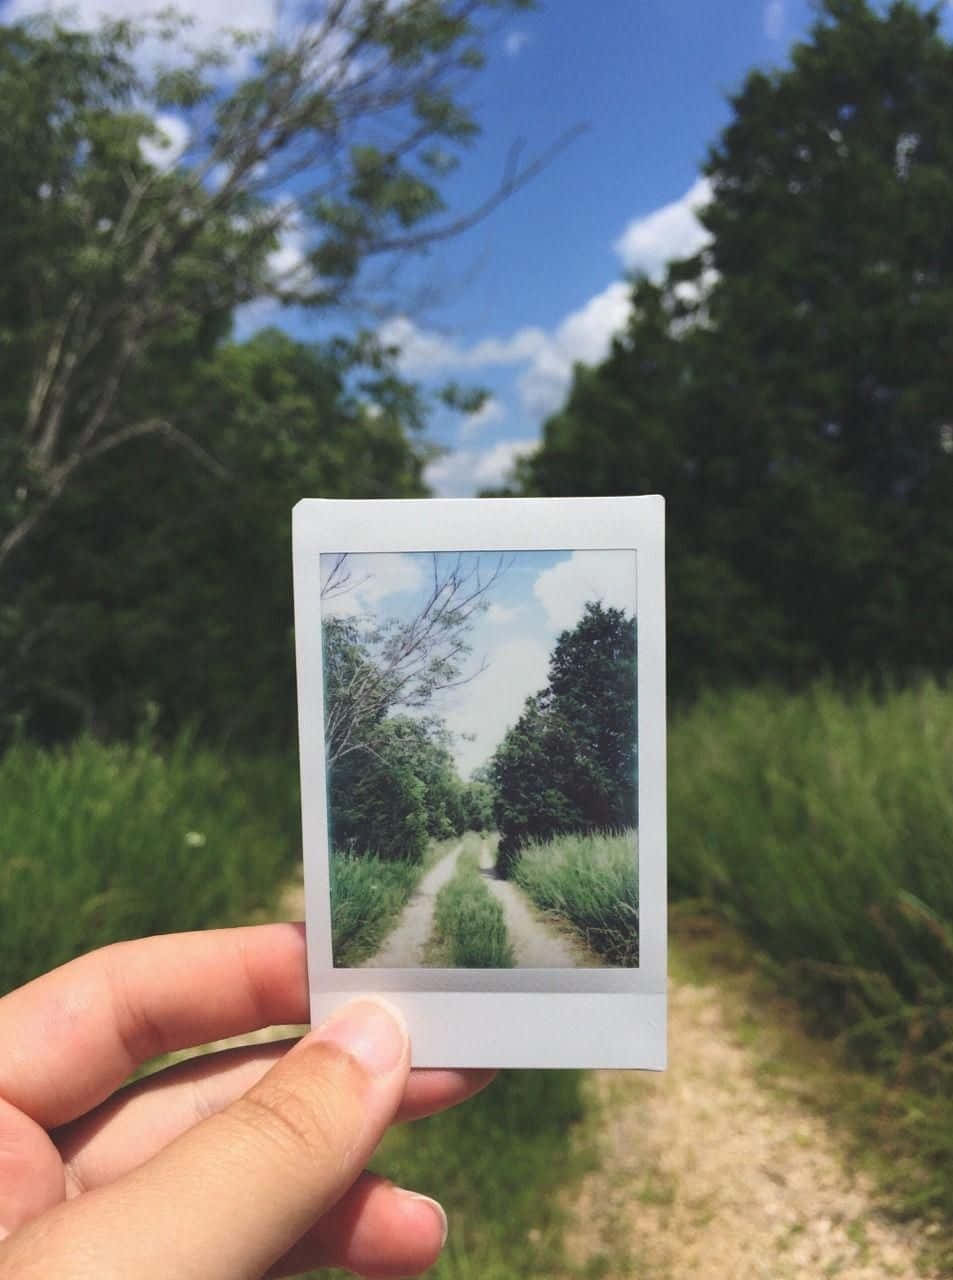 Capture memories with an aesthetic Polaroid.